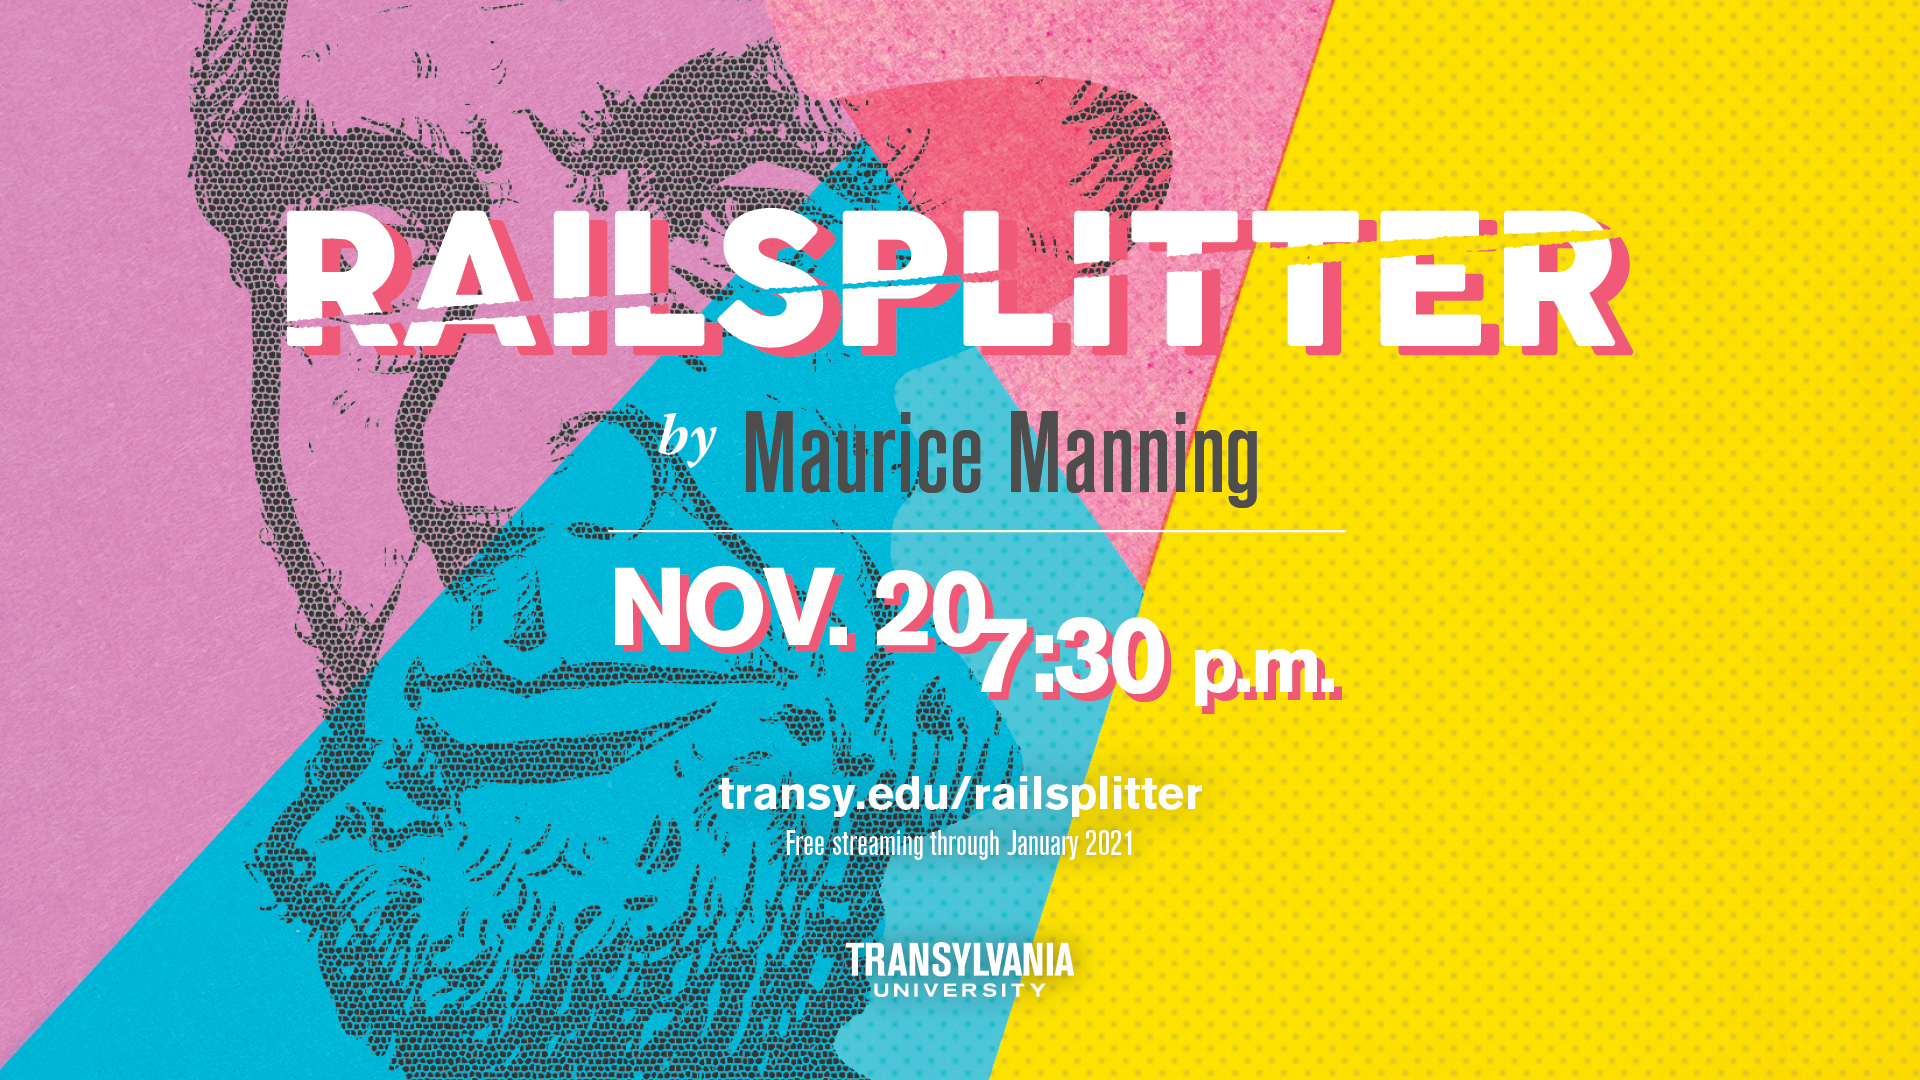 From students to alumni, Transylvania community collaborates on ‘Railsplitter’ theater production